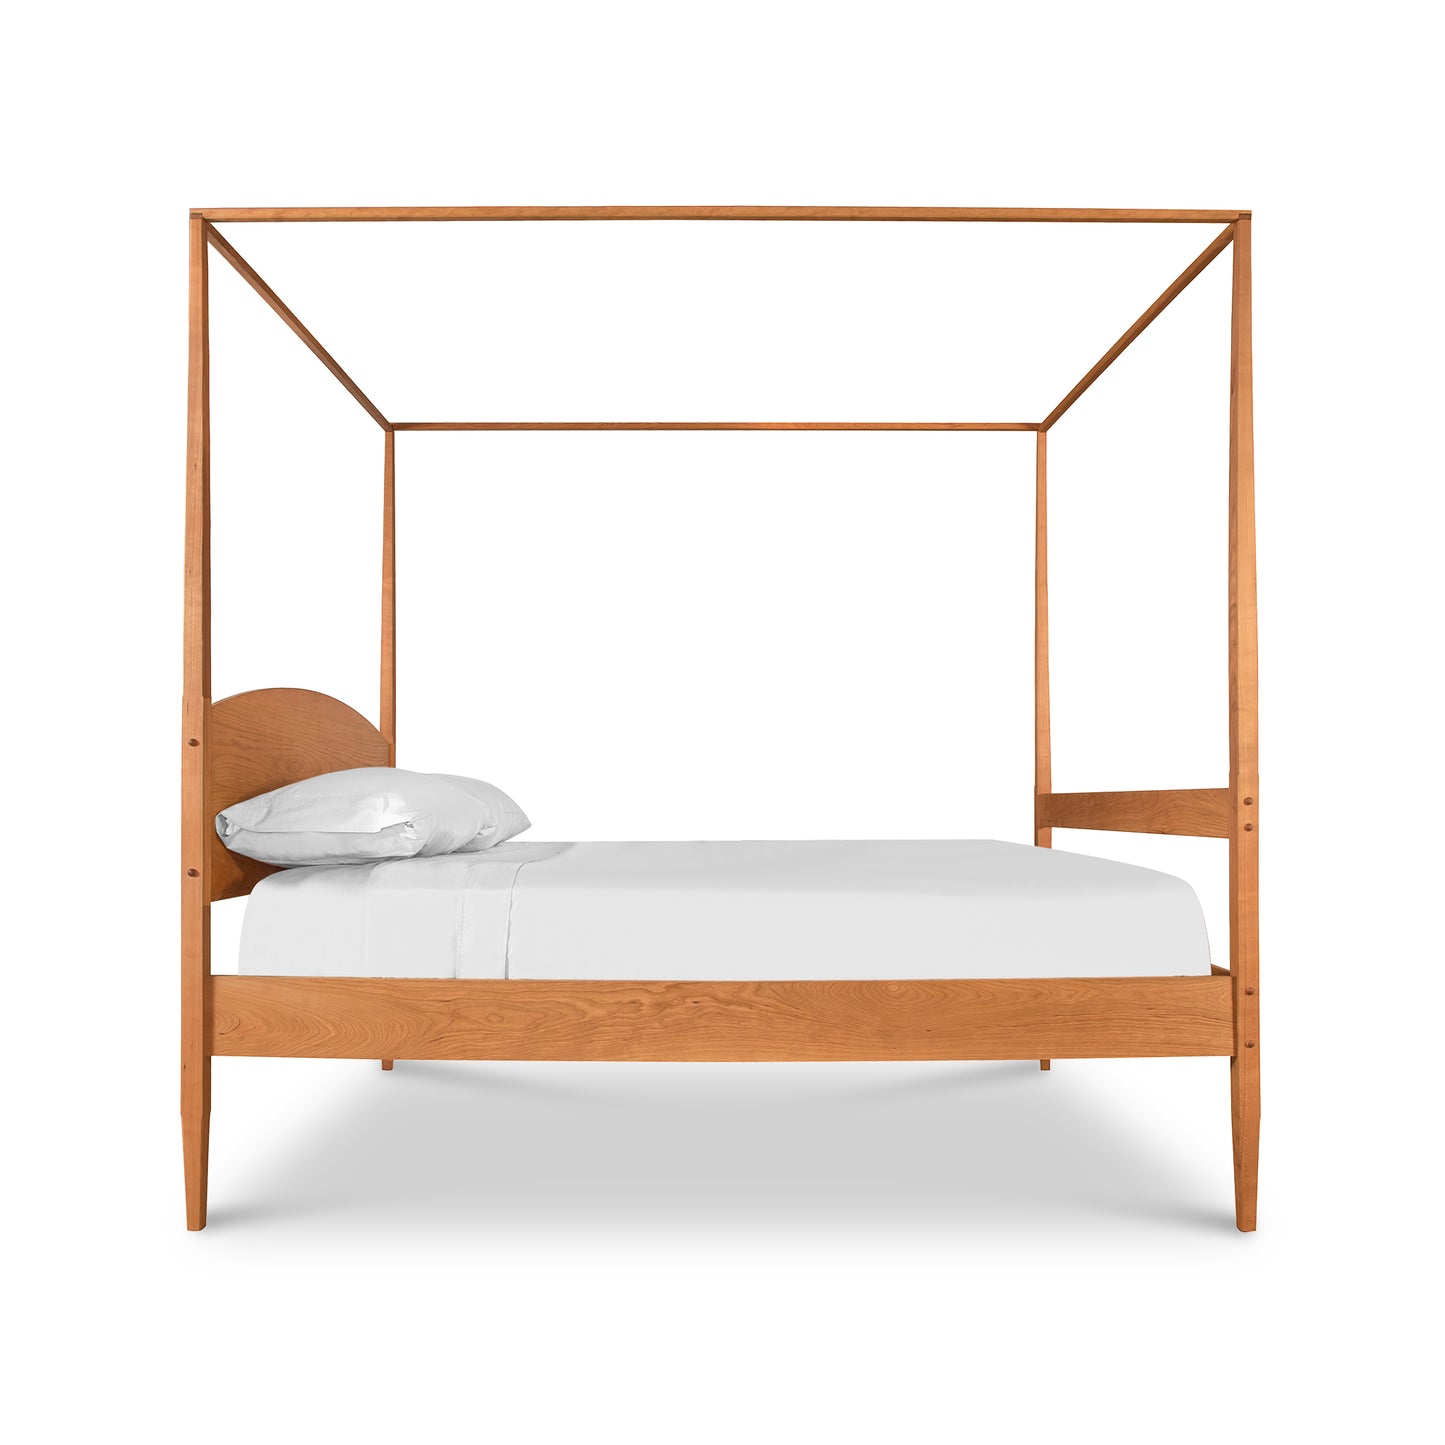 A modern Vermont Shaker Four Poster Bed with Canopy made of light oak wood, featuring a minimalist frame, with a single white pillow and a white mattress, isolated on a white background. (Brand: Maple Corner Woodworks)